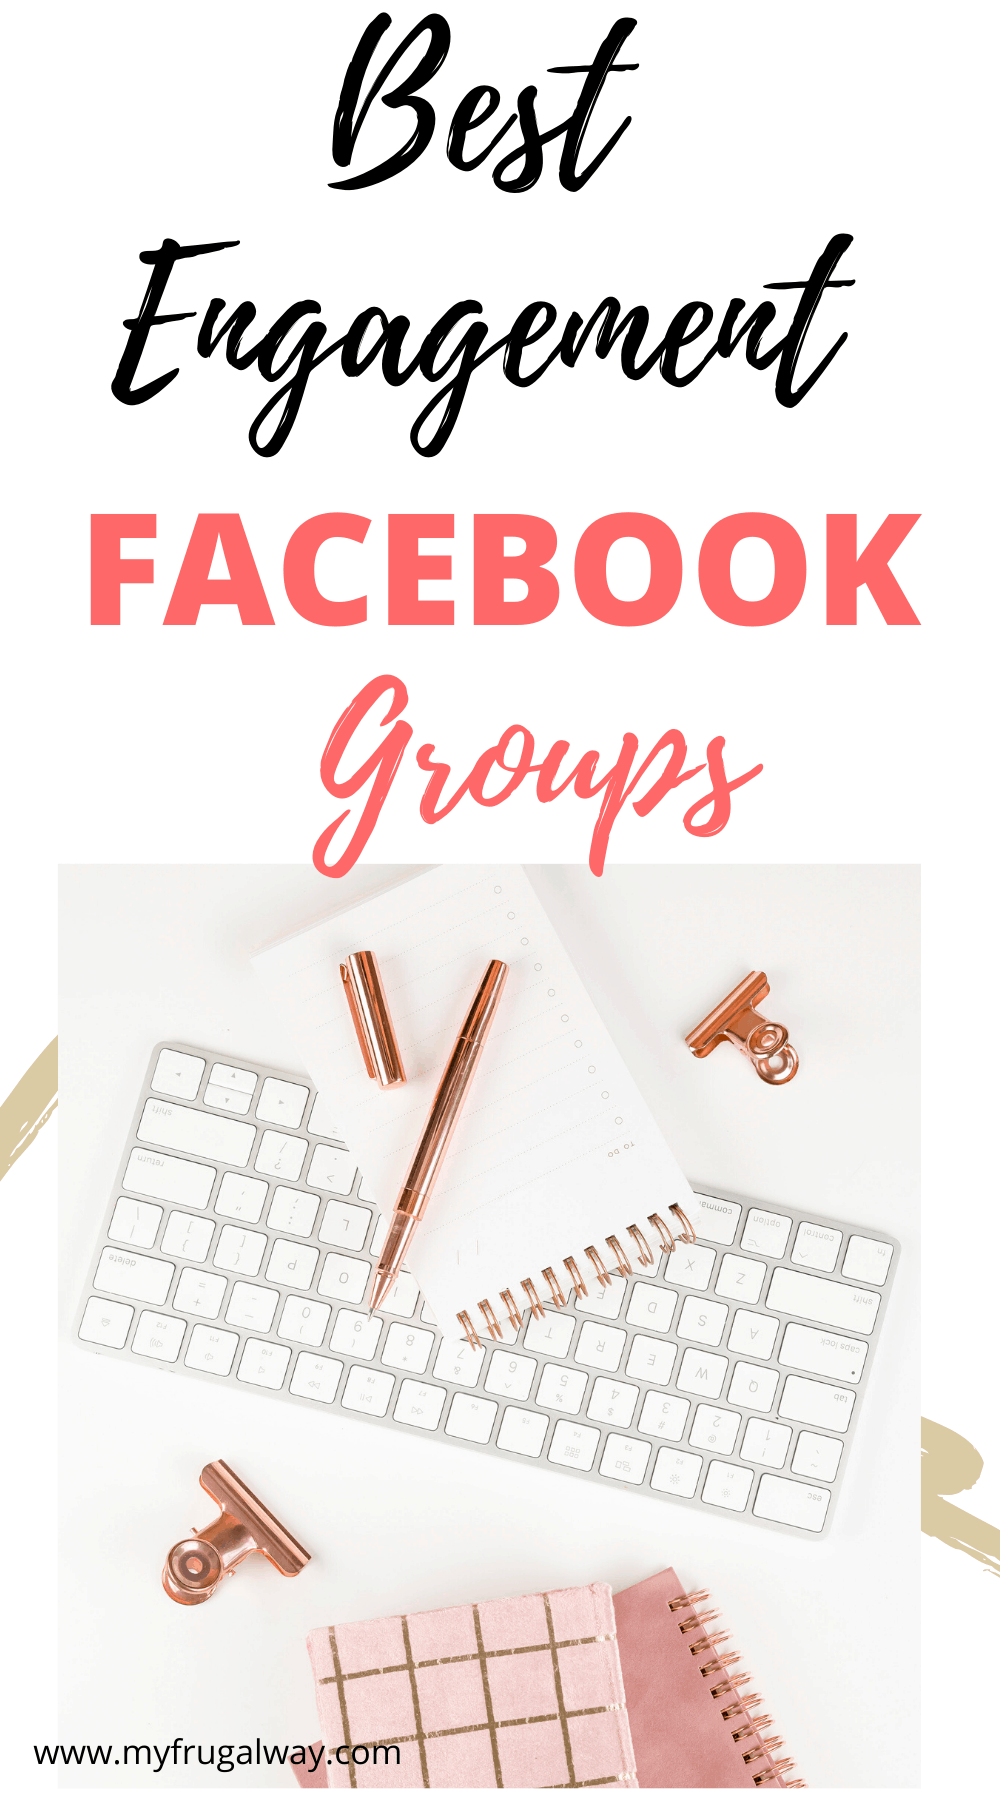 Best facebook engagement groups for interaction posts. Join my engagement facebook group fir growth. 